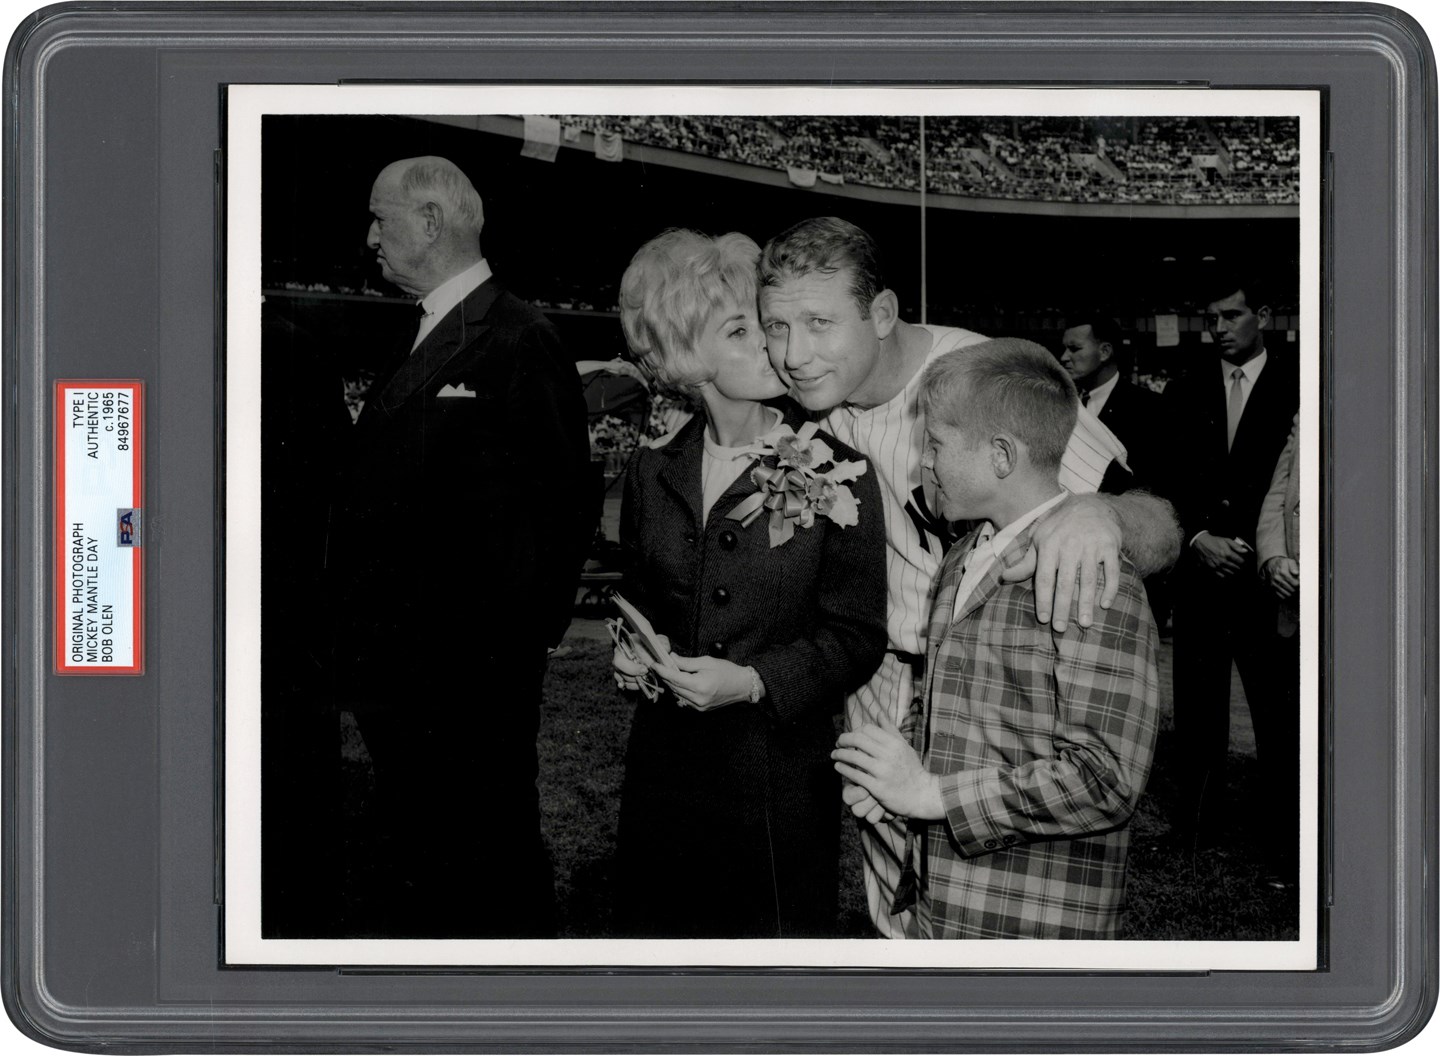 - 1965 Mickey Mantle Day Photograph (PSA Type I)